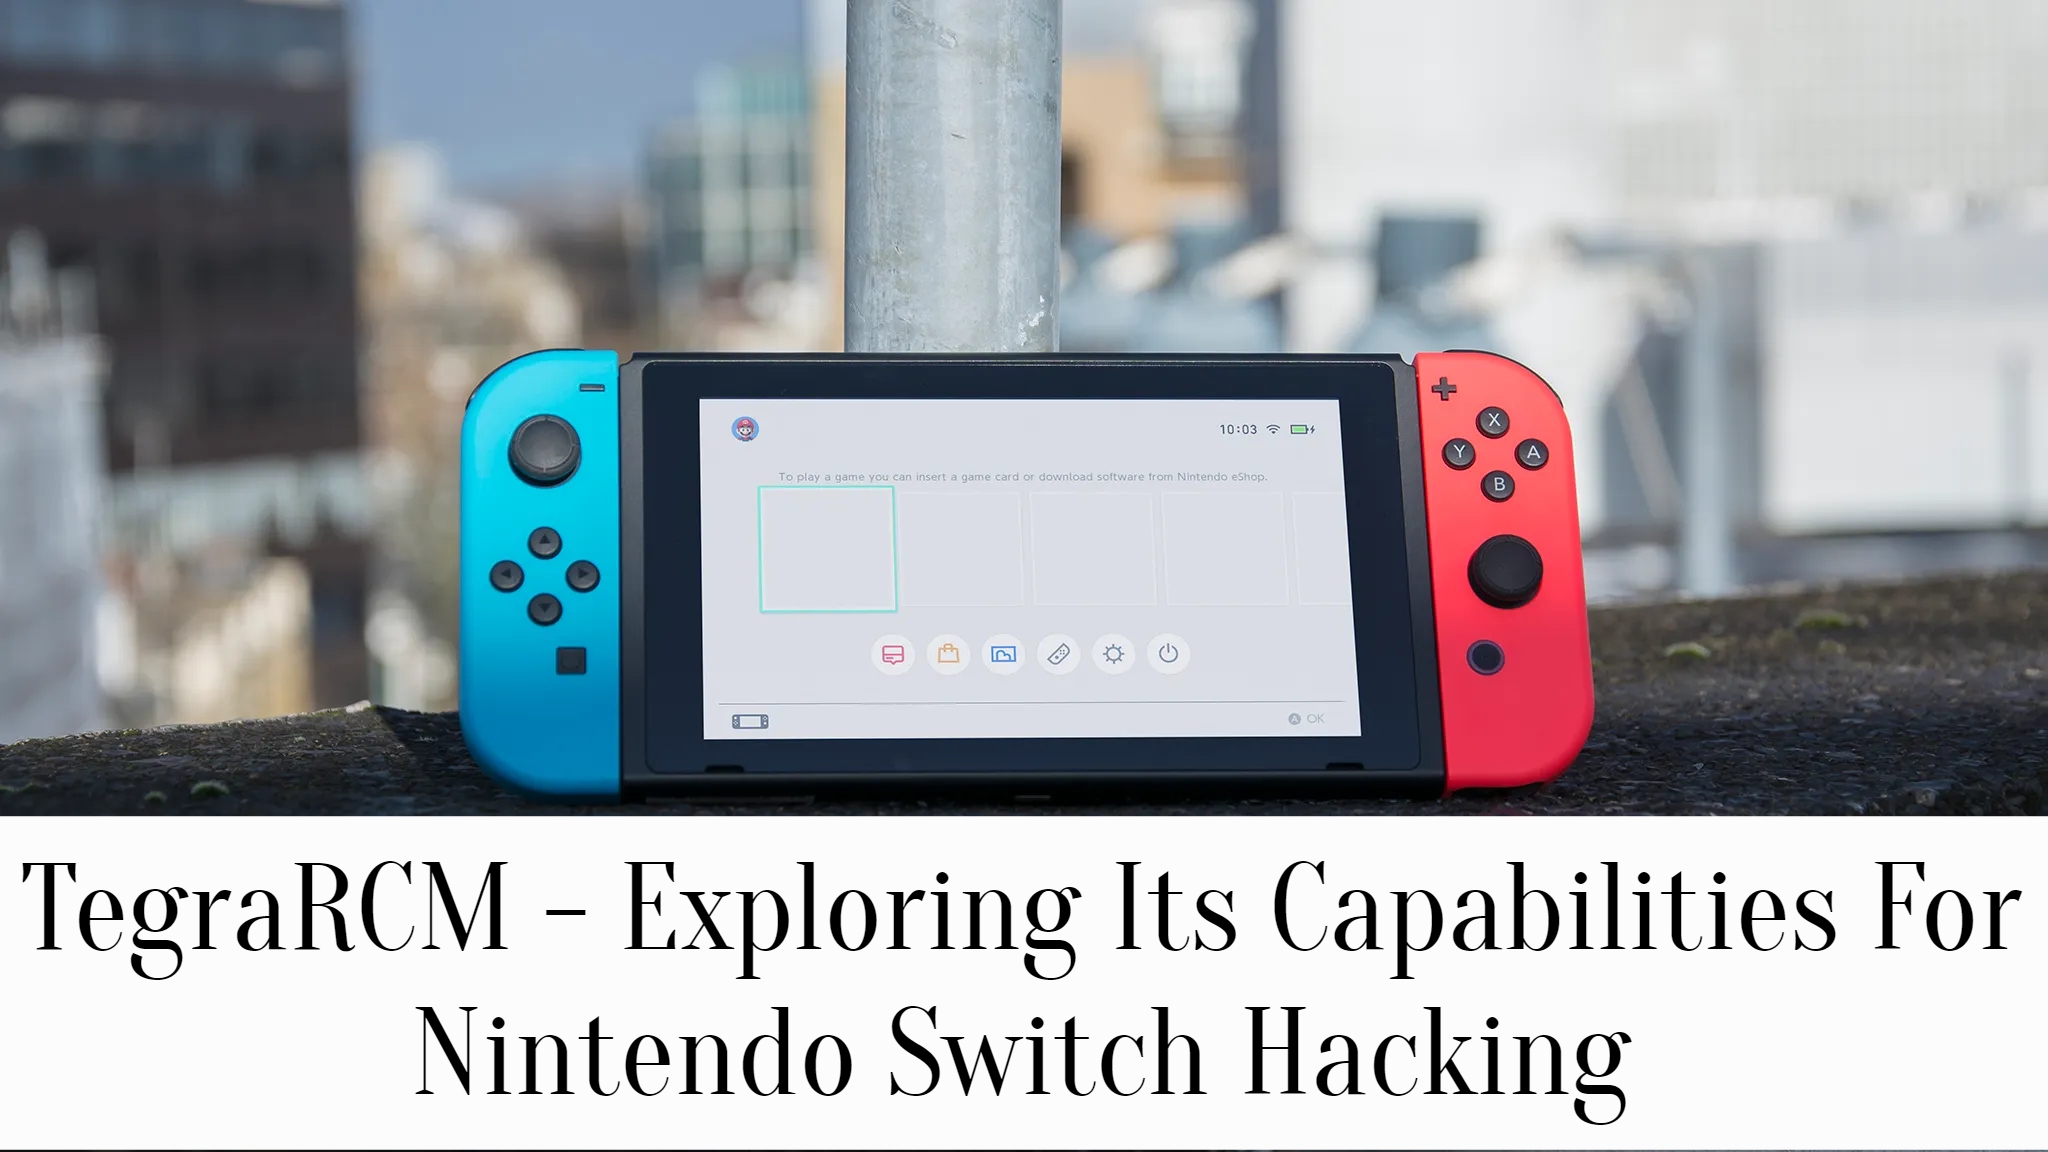 TegraRCM - Exploring Its Capabilities For Nintendo Switch Hacking